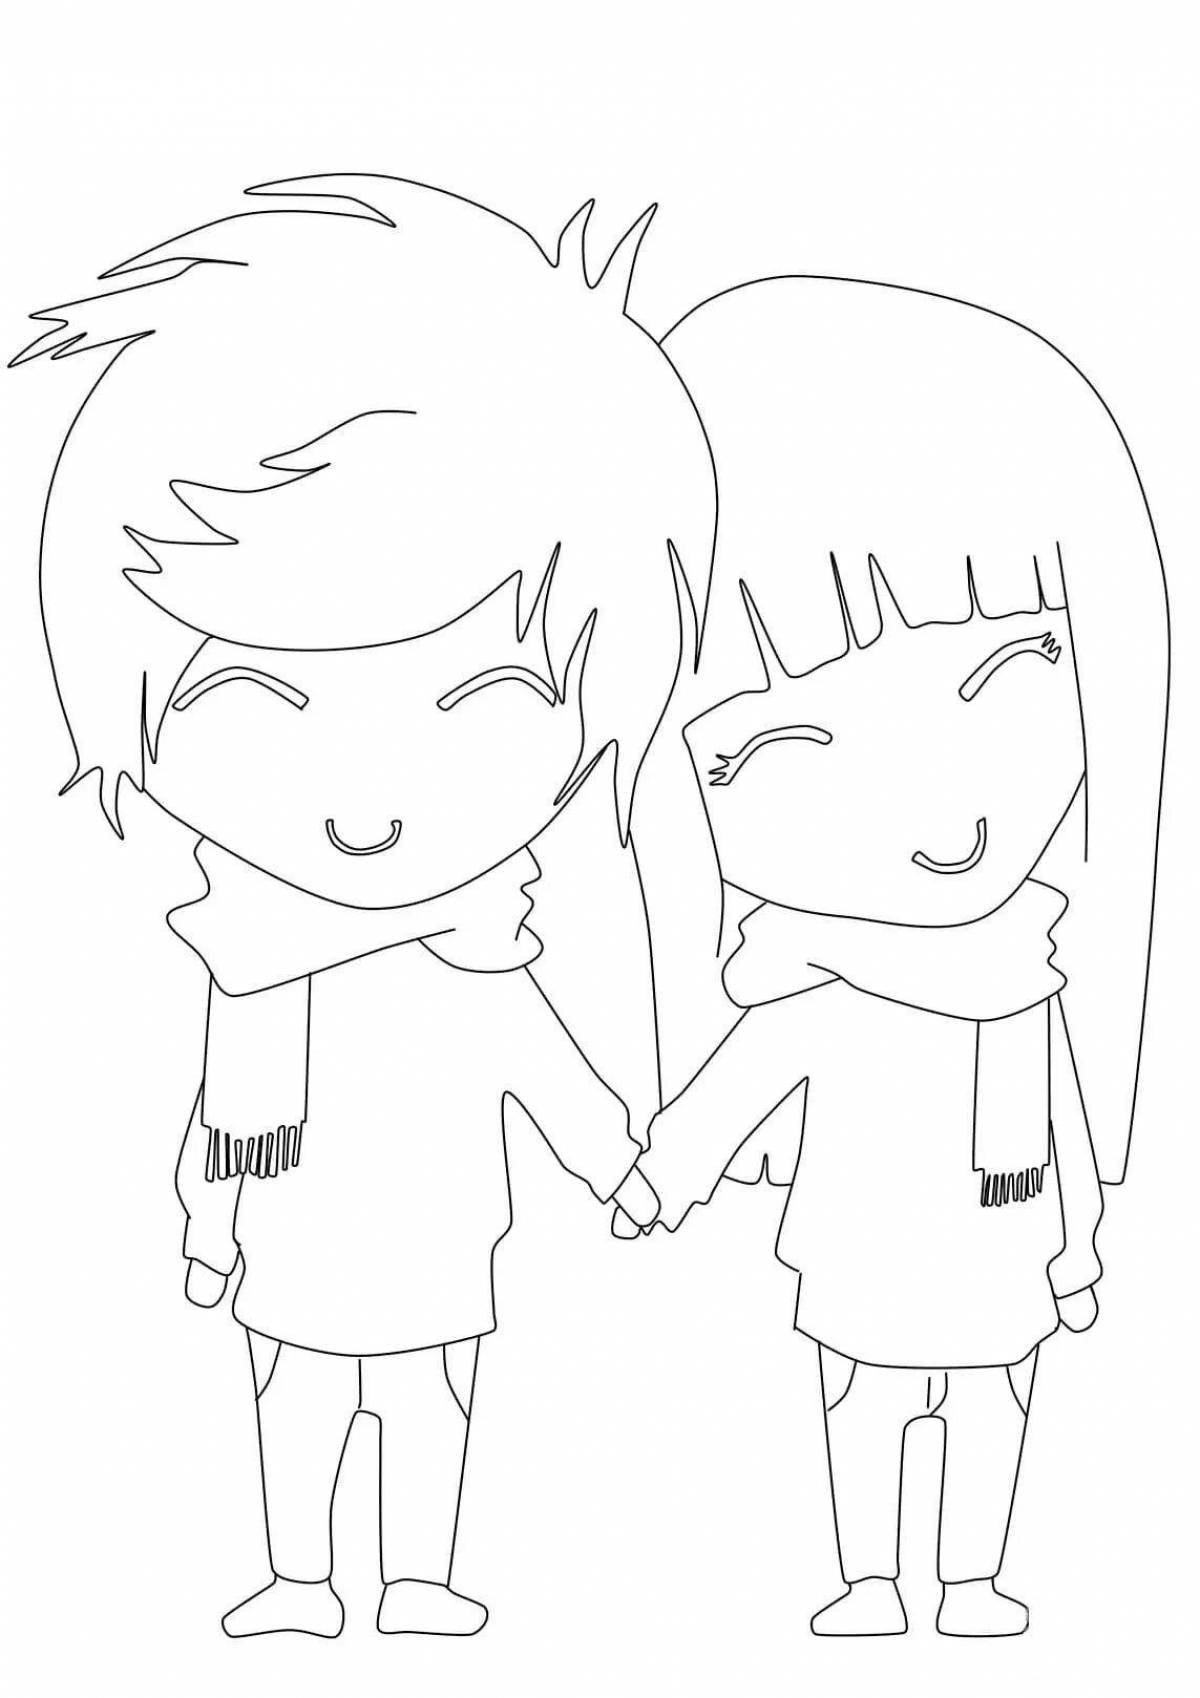 Gorgeous anime boy and girl coloring book